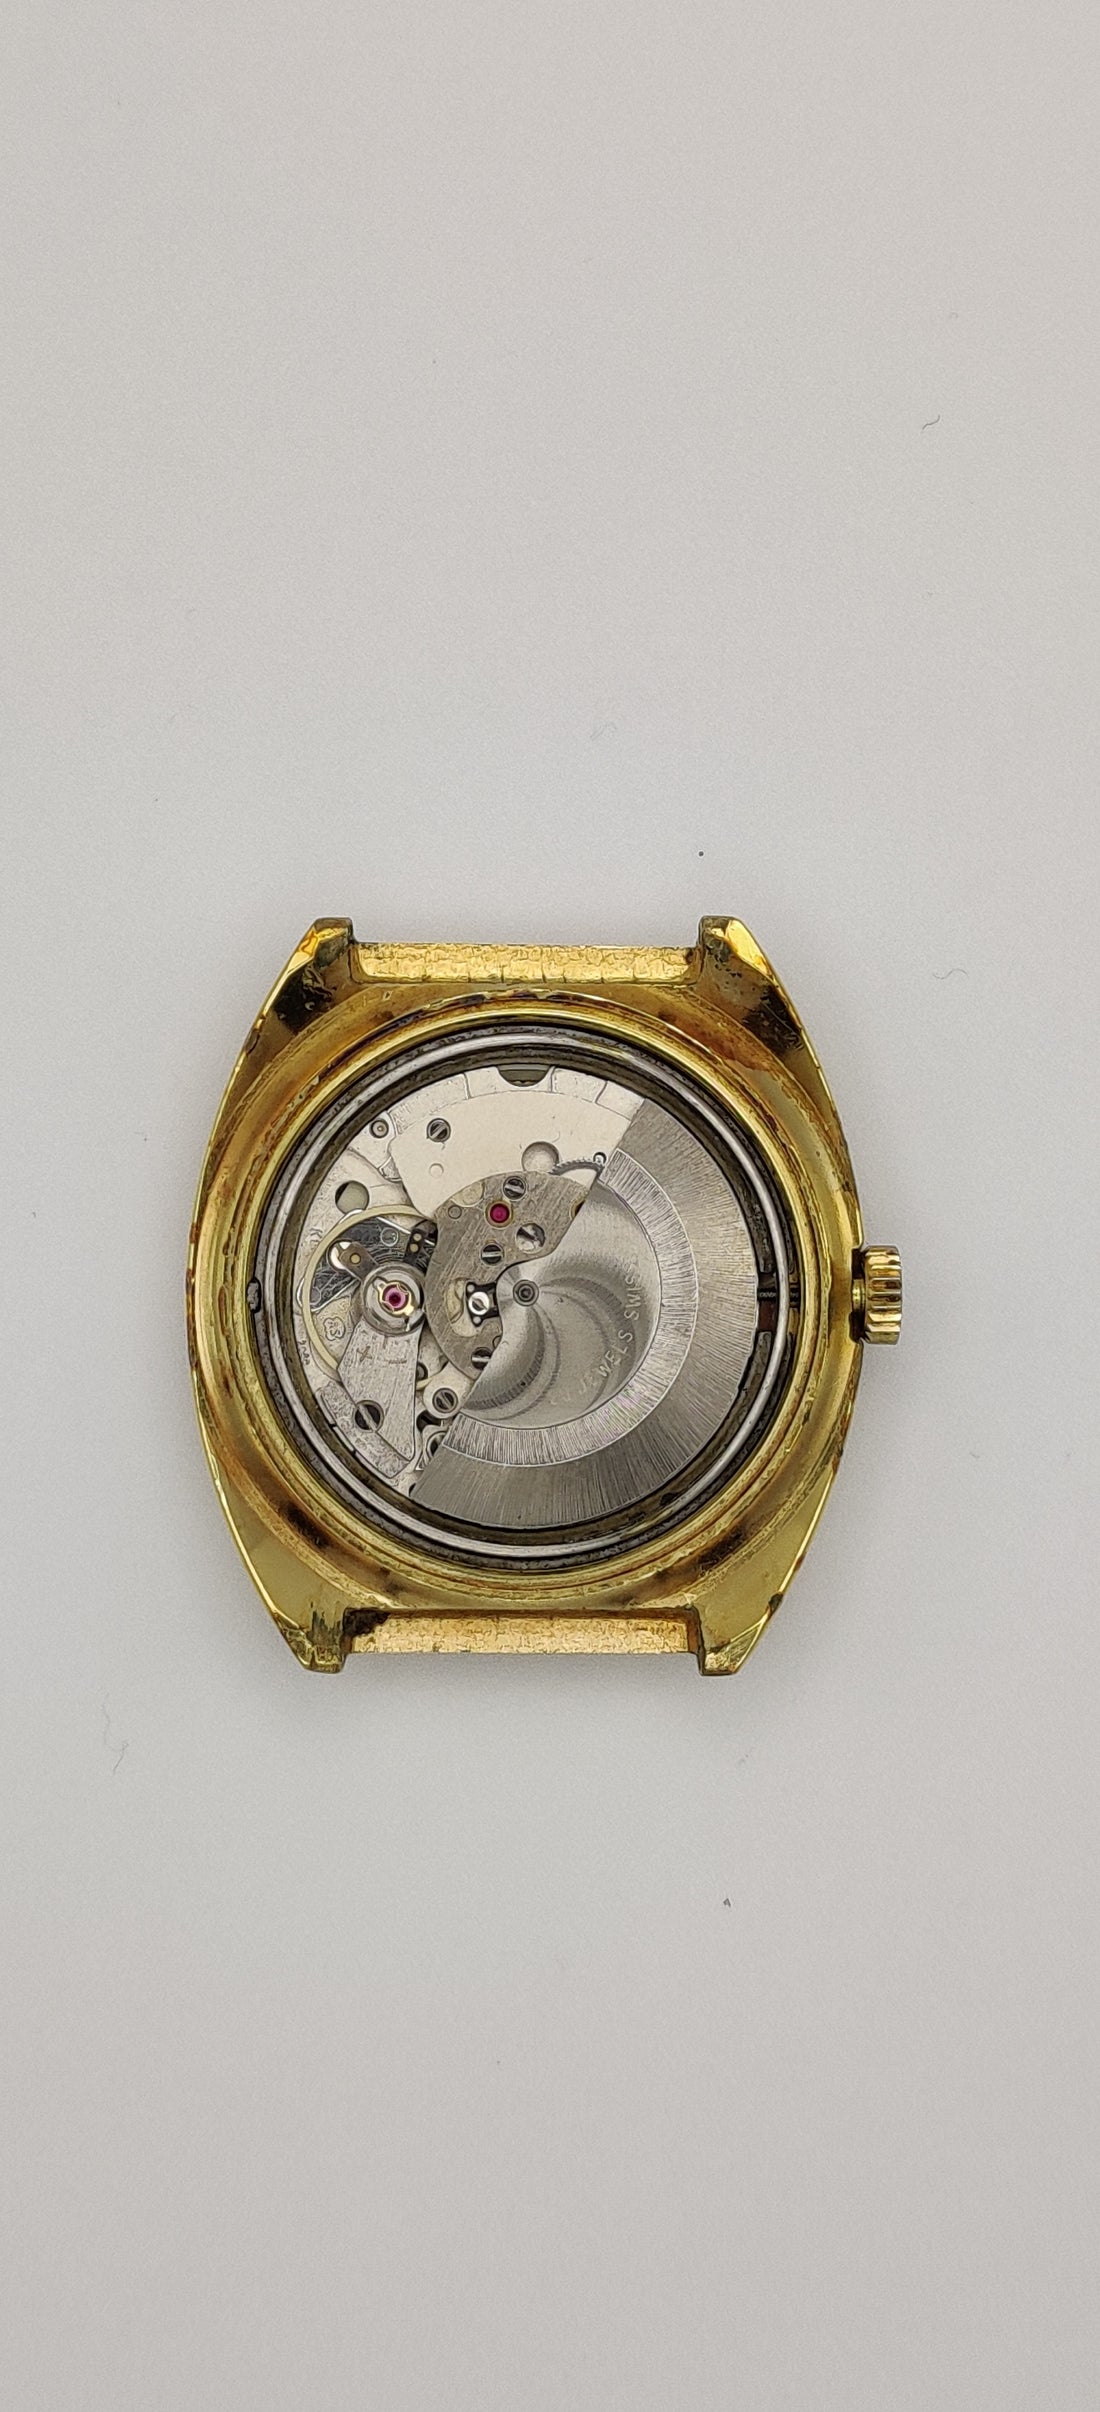 How to Maintain Your Vintage Automatic Watch